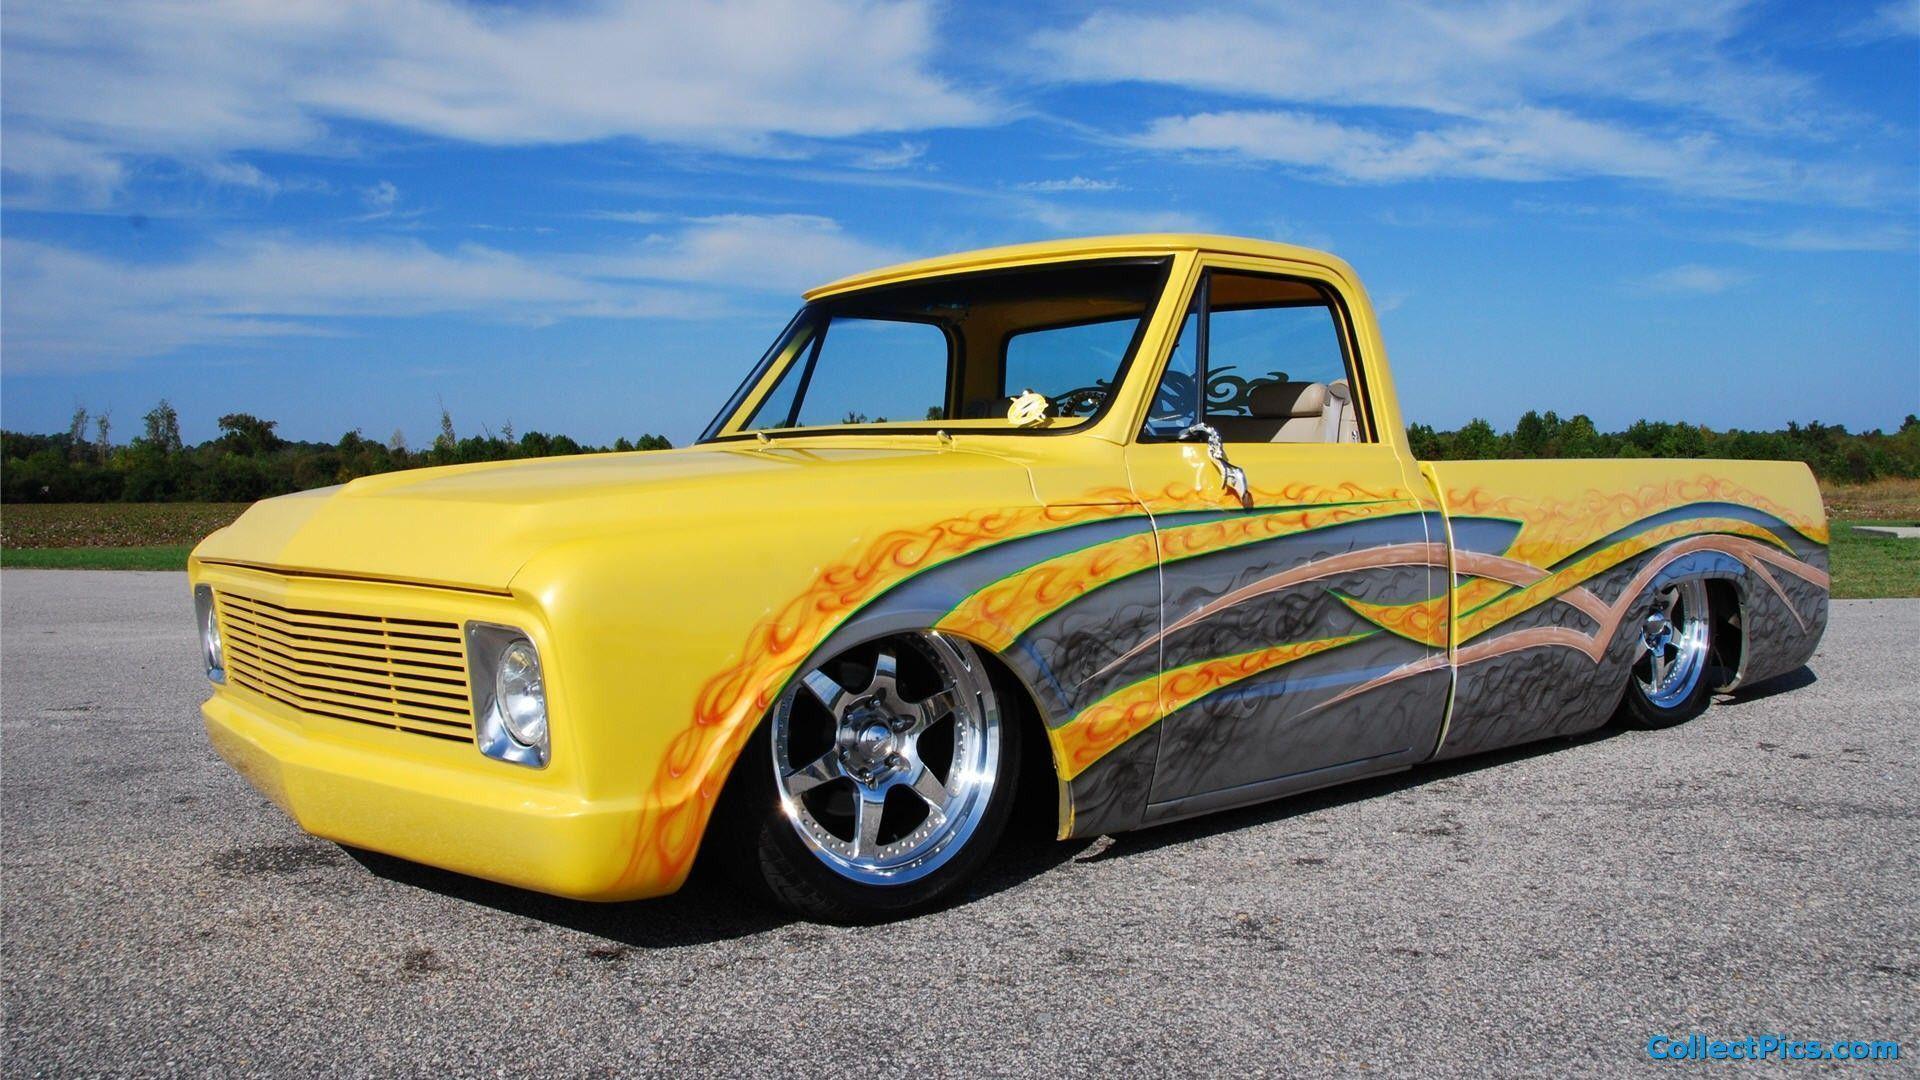 image For > Lowrider Cars Wallpaper